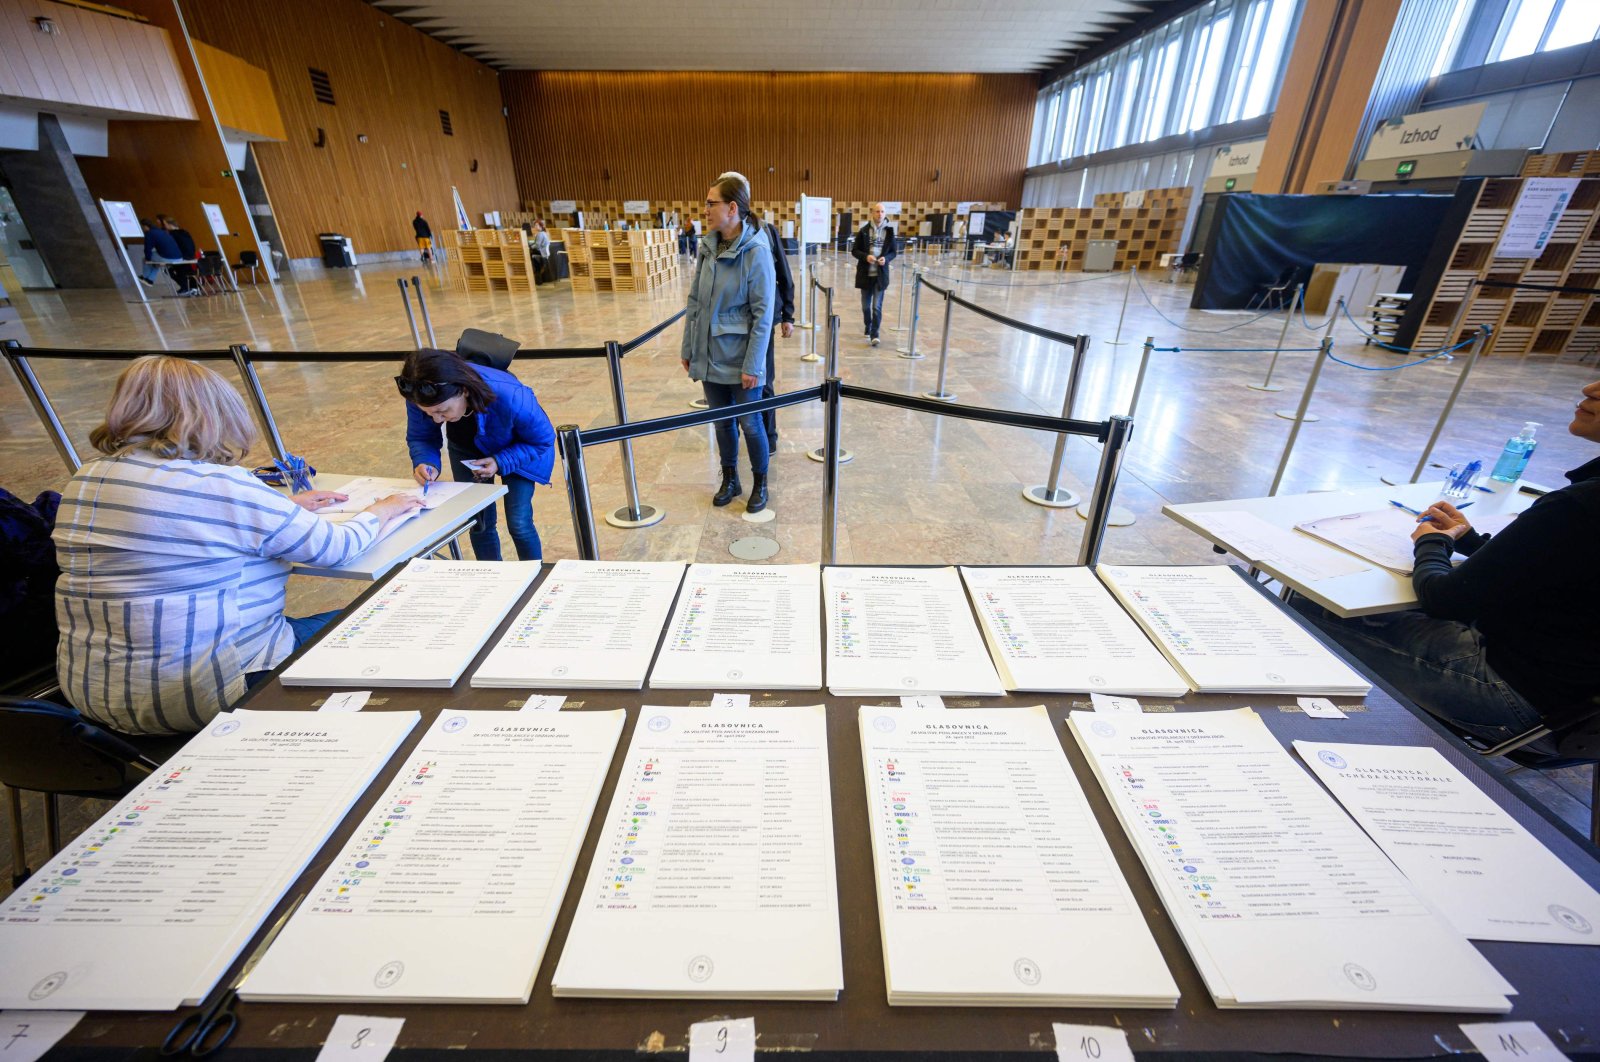 A photograph shows voting ballots at a polling station during a general election in Ljubljana, Slovenia, April 24, 2022. (AFP Photo)